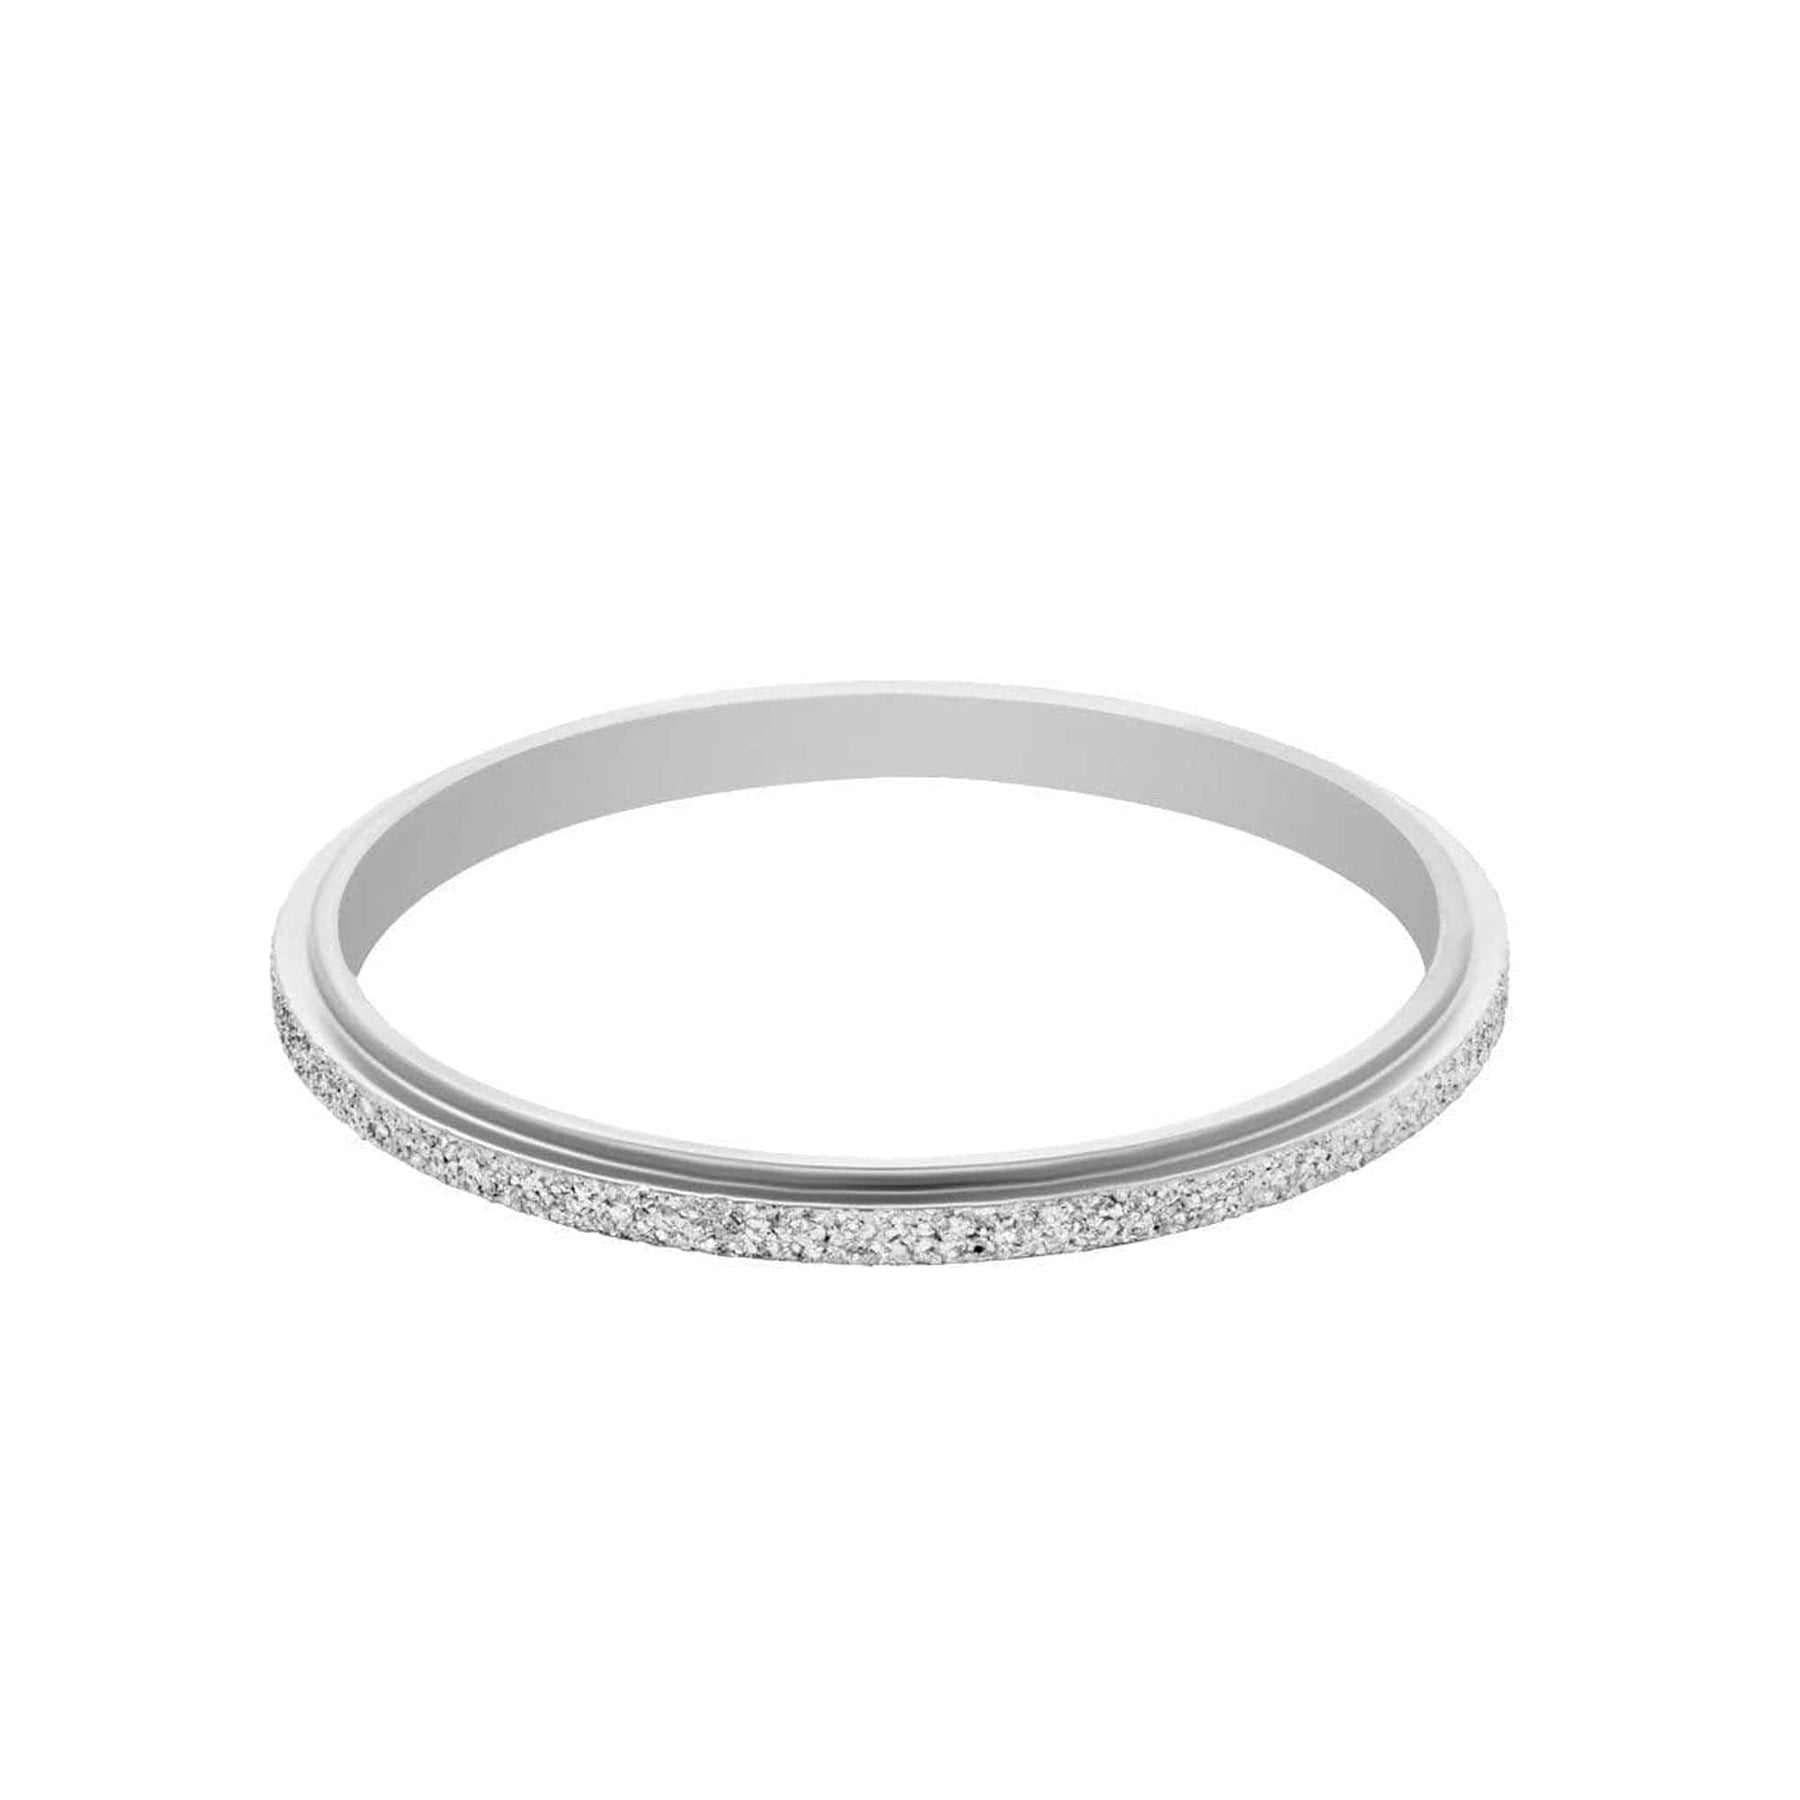 BohoMoon Stainless Steel Carly Ring Silver / US 4 / UK H / EUR 46 / (xxsmall)